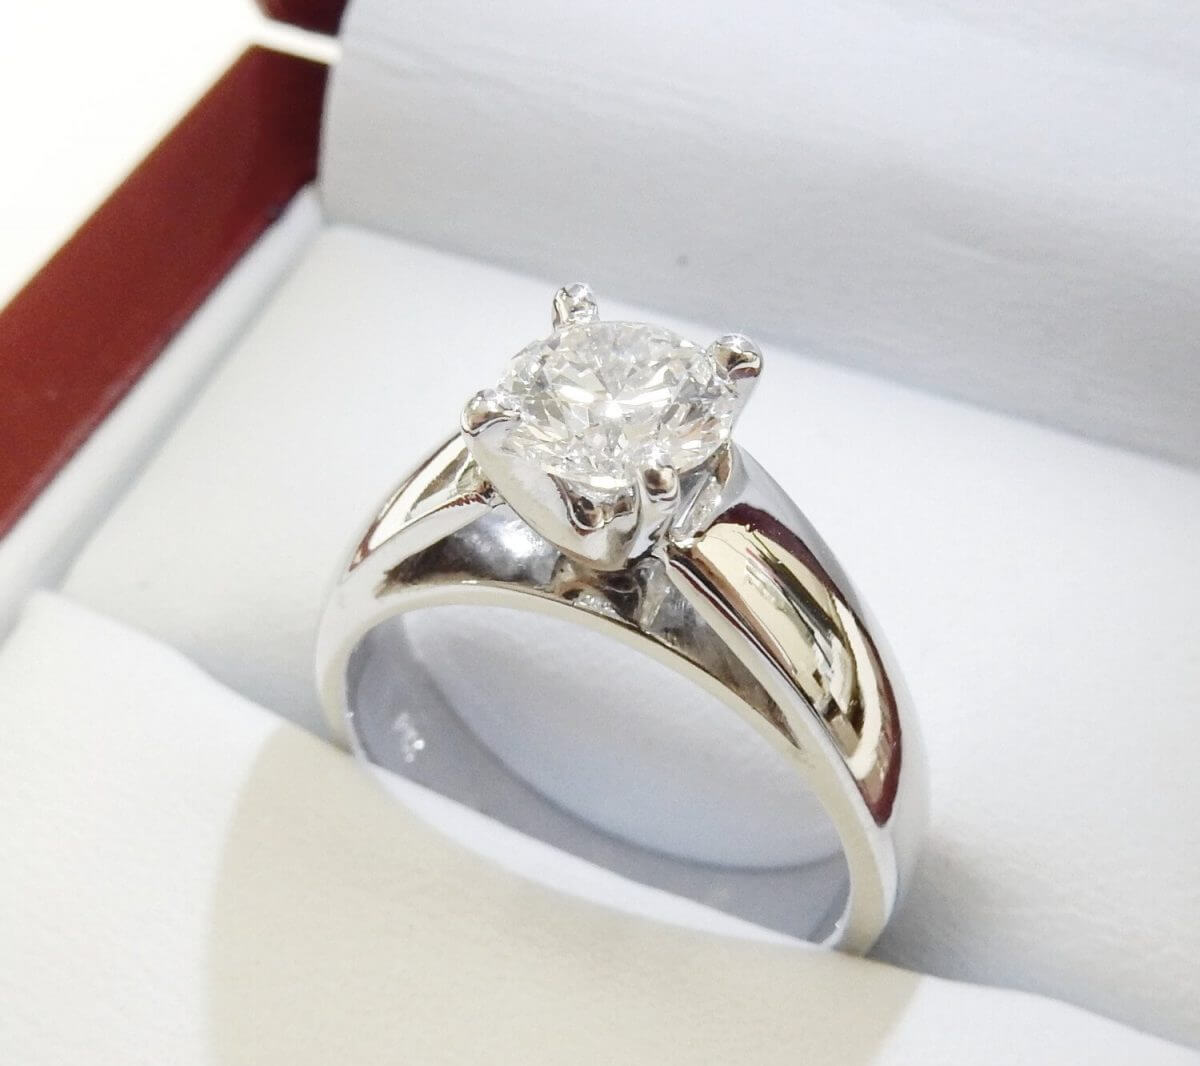 Solitaire diamond engagement ring